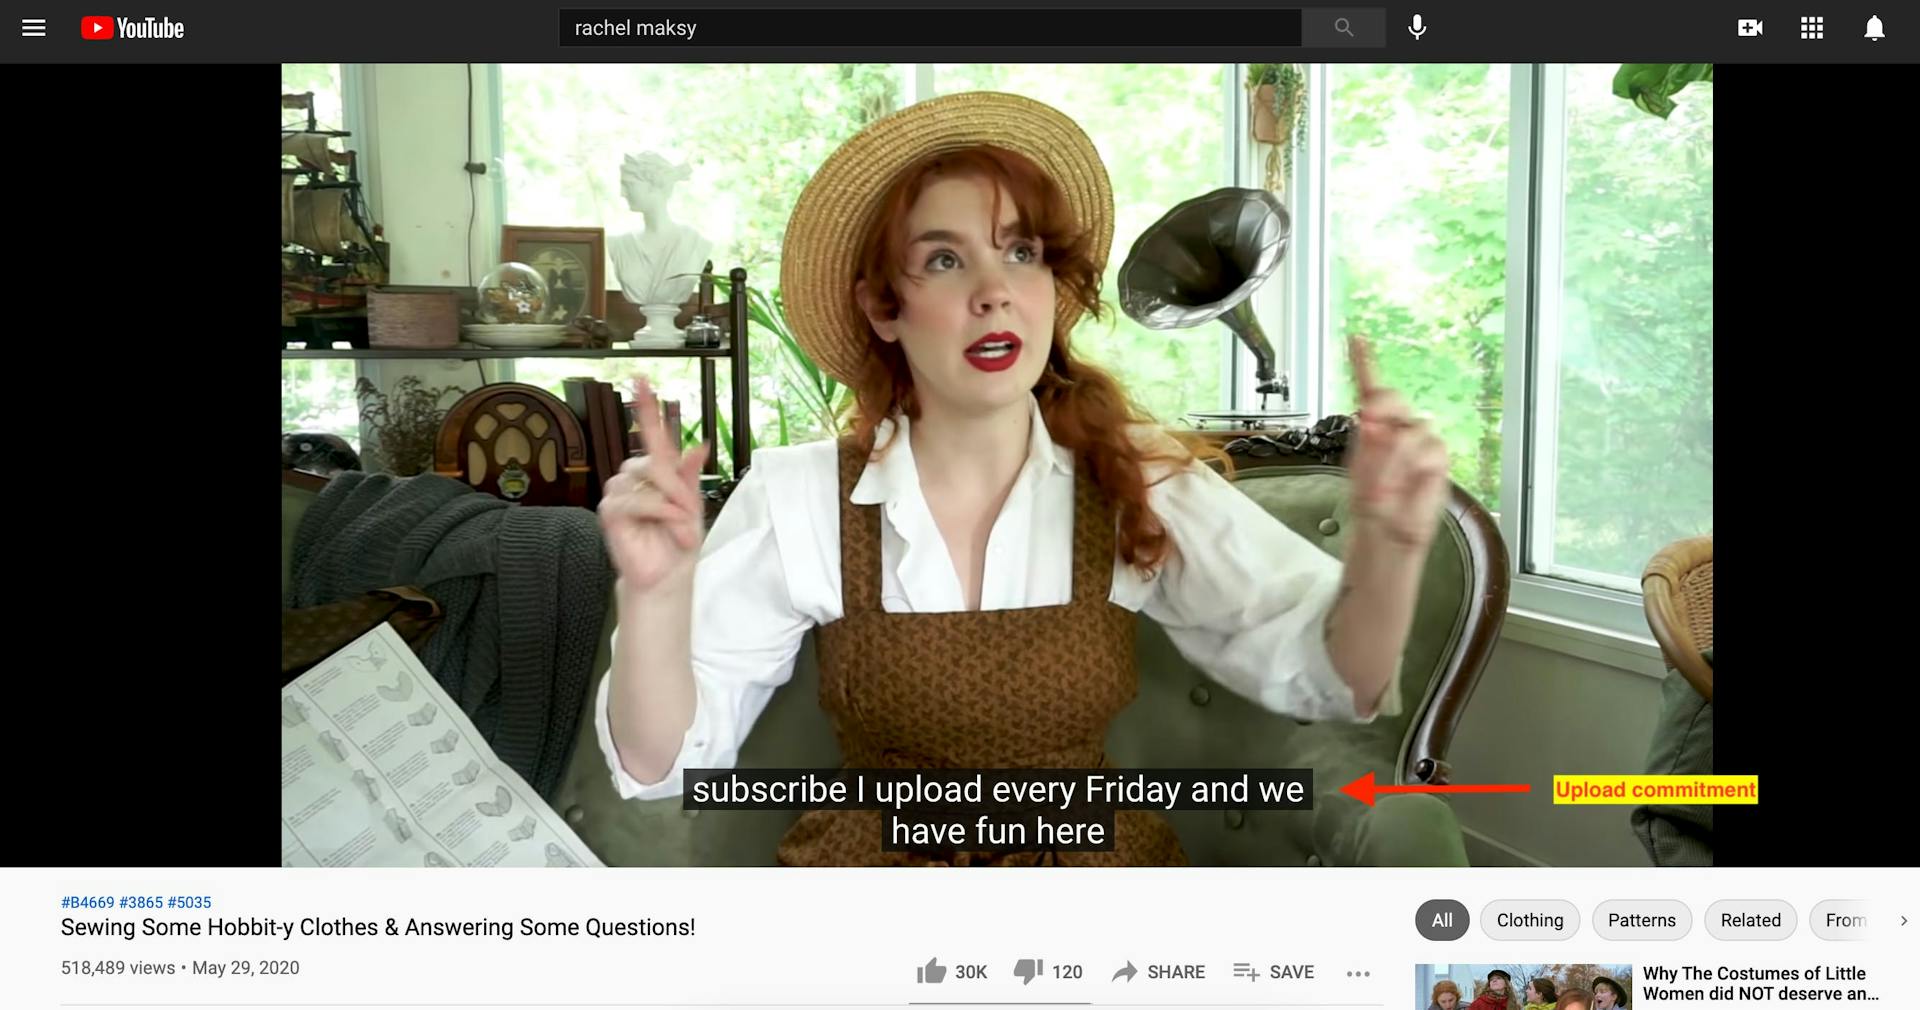 Screengrab with closed captions showing YouTuber promising regular weekly uploads